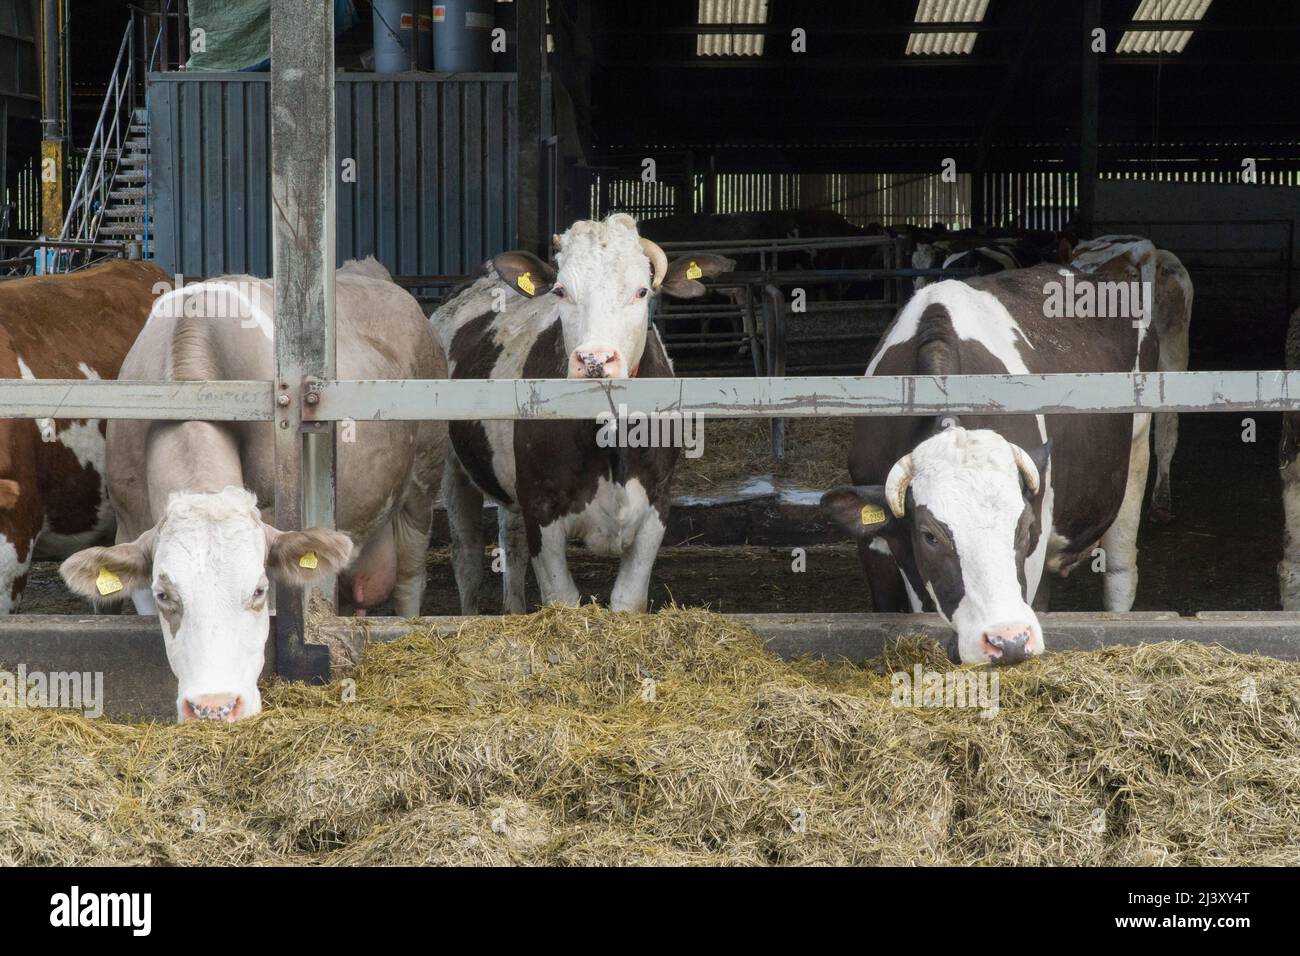 An organic dairy herd of cows on a farm in Wiltshire. Anna Watson/Alamy Stock Photo